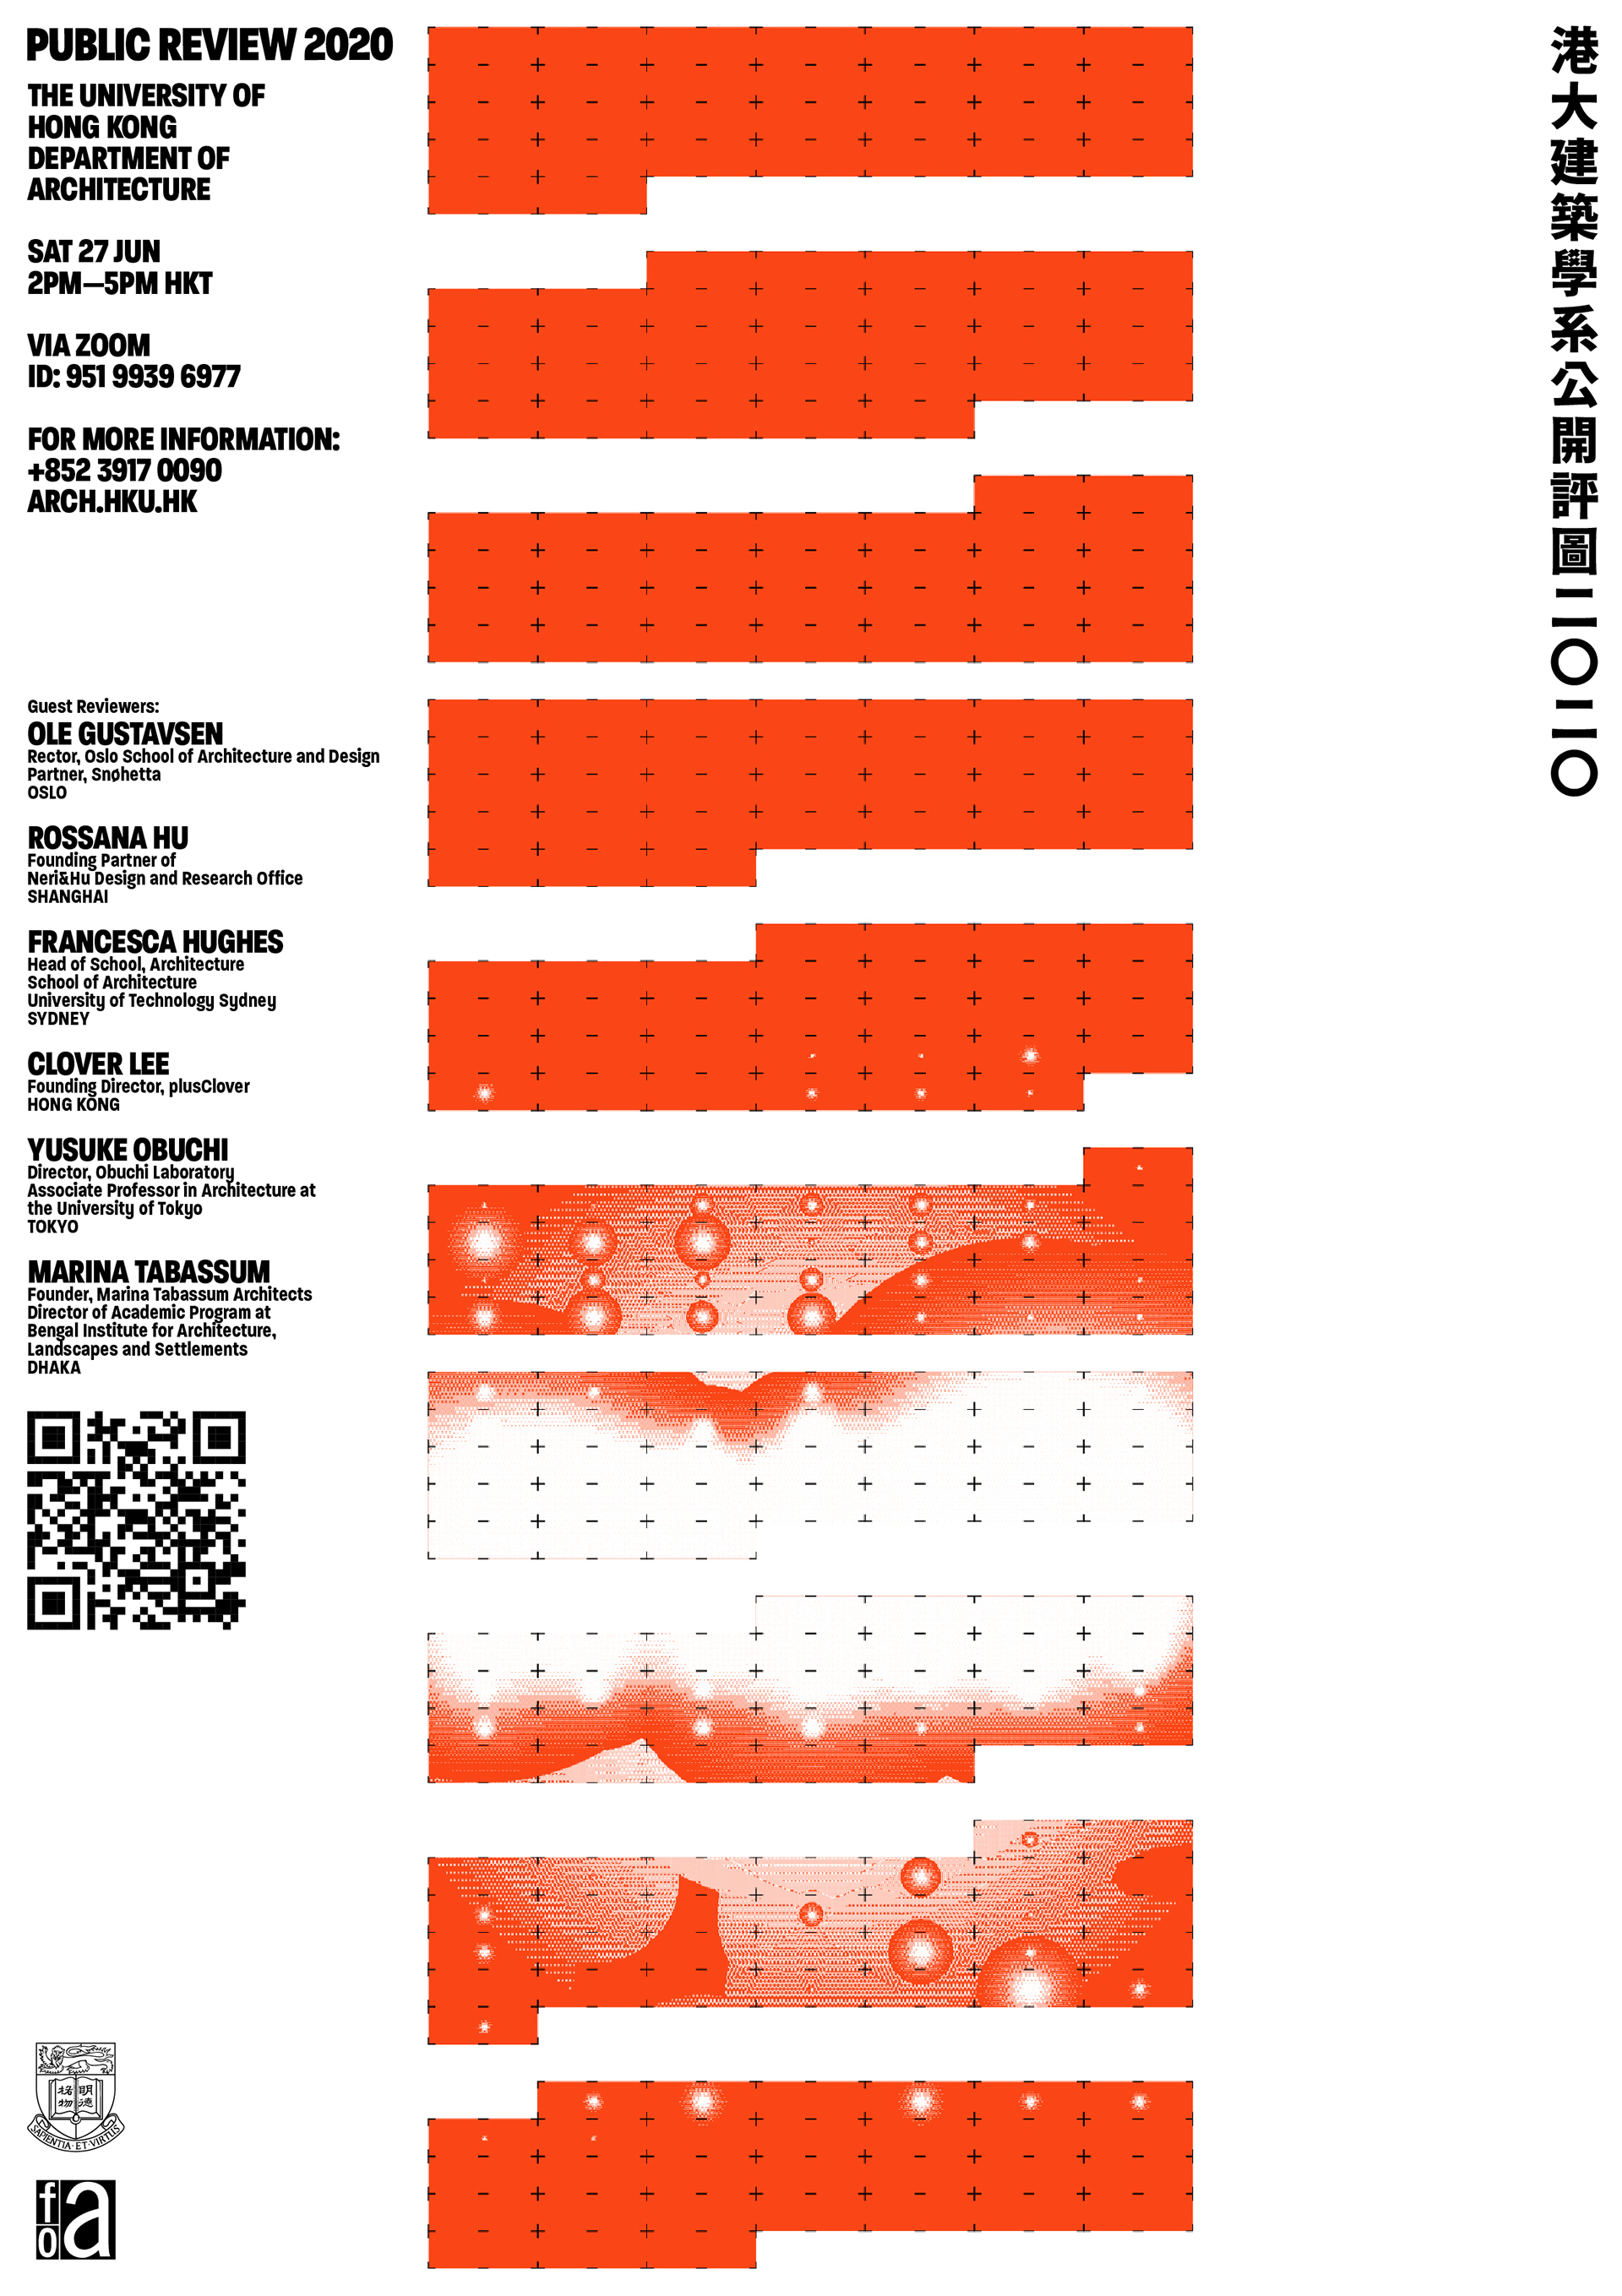 HKU Department of Architecture: Public Review 2020